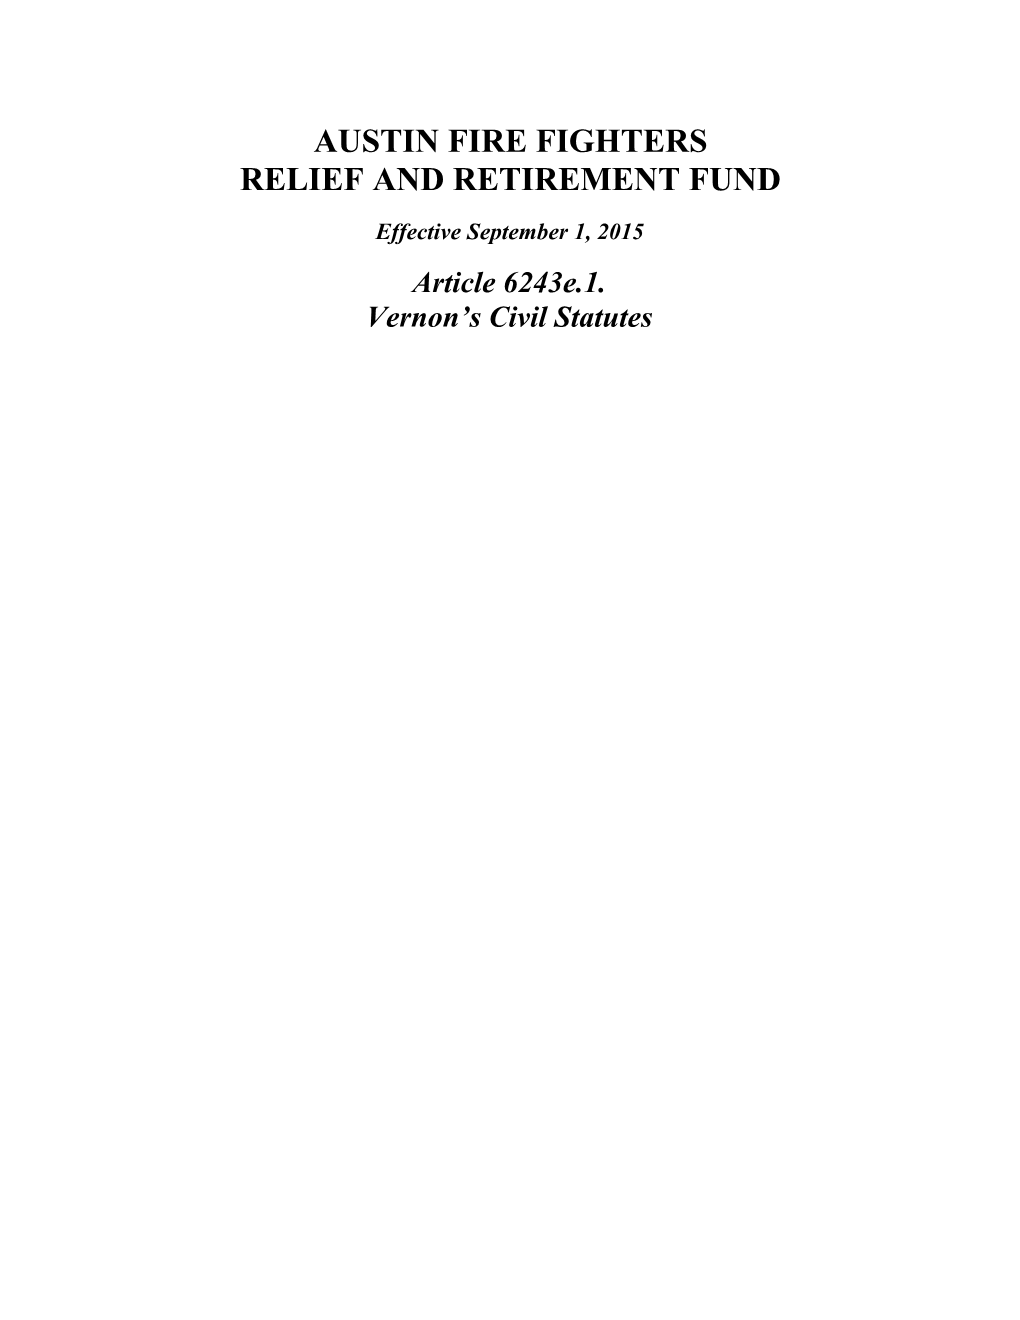 Austin Fire Fighters Relief and Retirement Fund s1